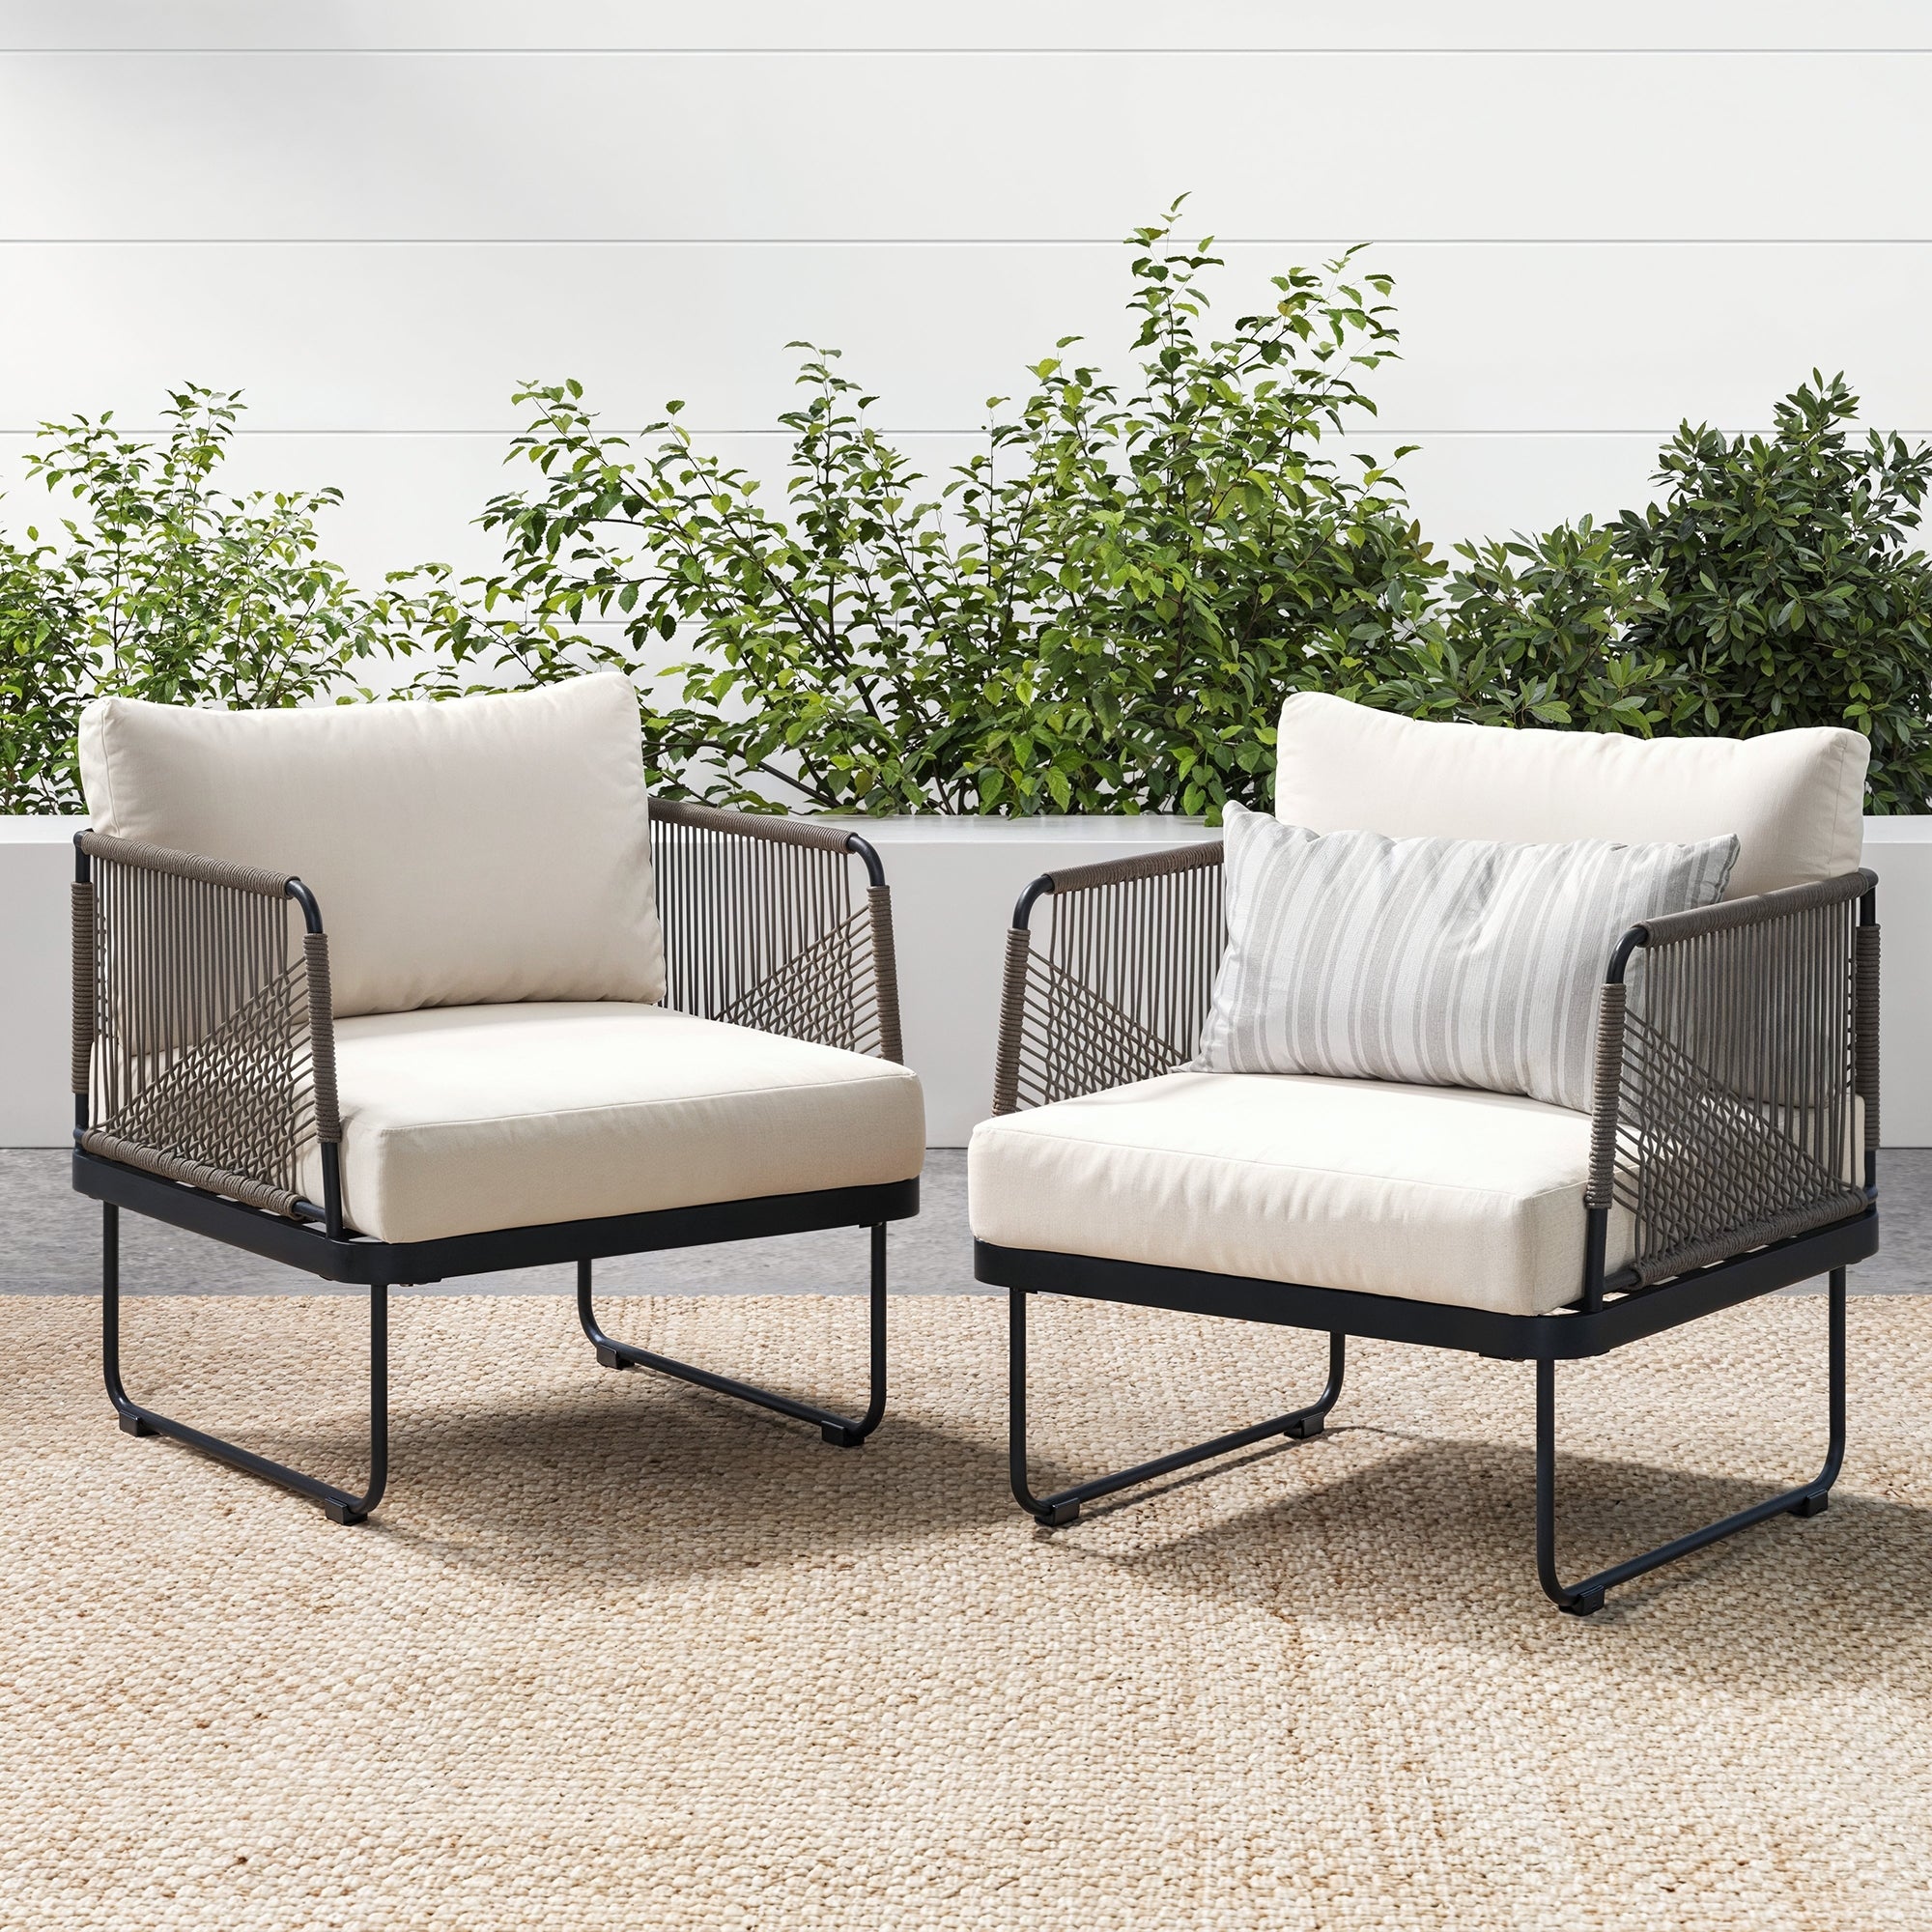 Set of 2 Outdoor Cord Patio Arm Chairs White